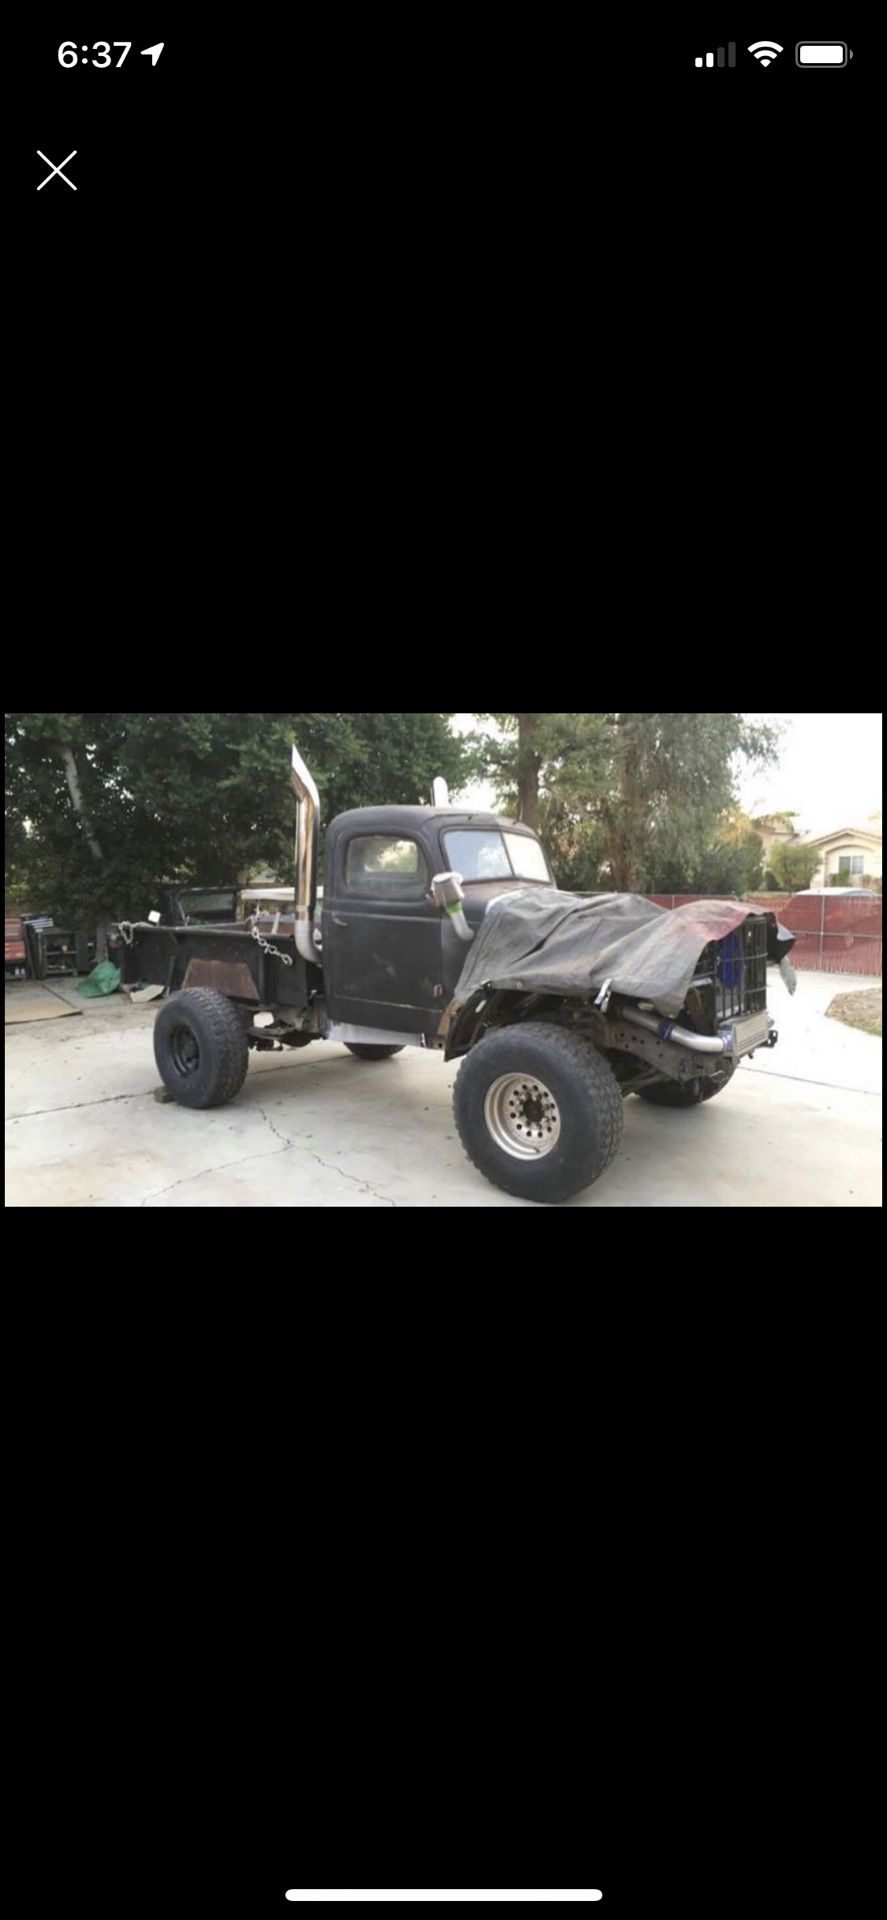 1999 4x4 3500 dodge diesel. Base , 1941 dodge power wagon cab and bed , need more fabrication to Finiget , suspension transmission and motor work go